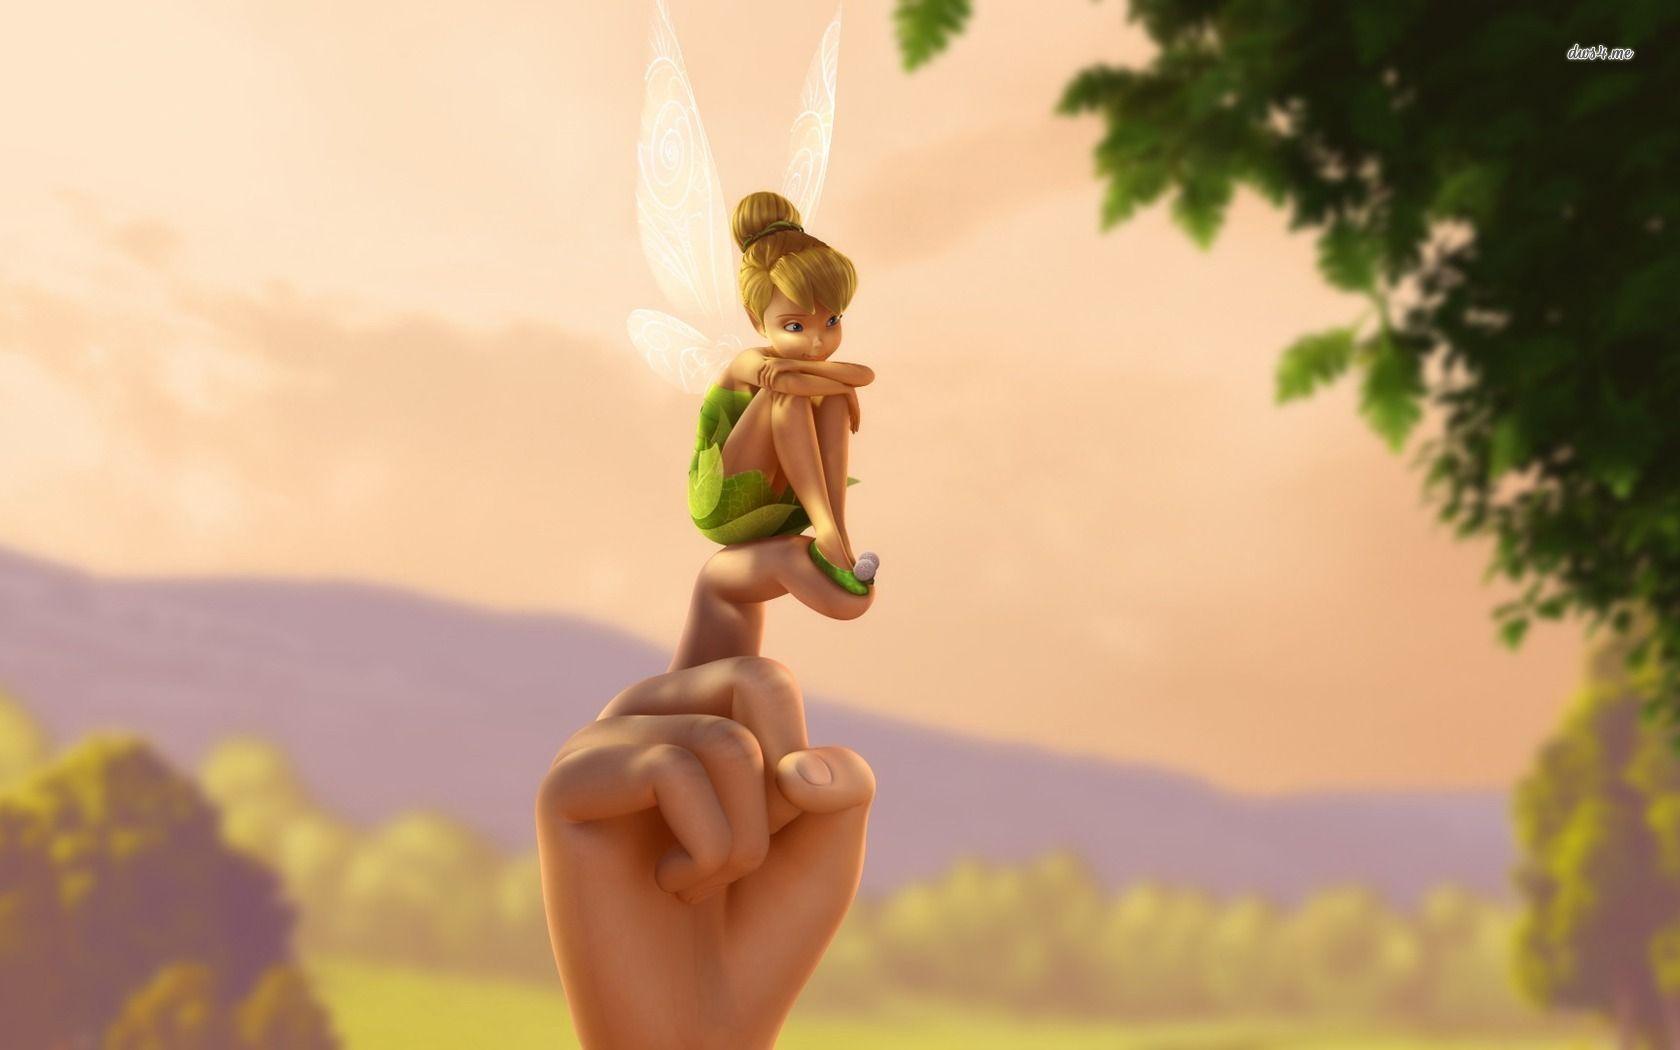 Tinkerbell Wallpaper For Puters